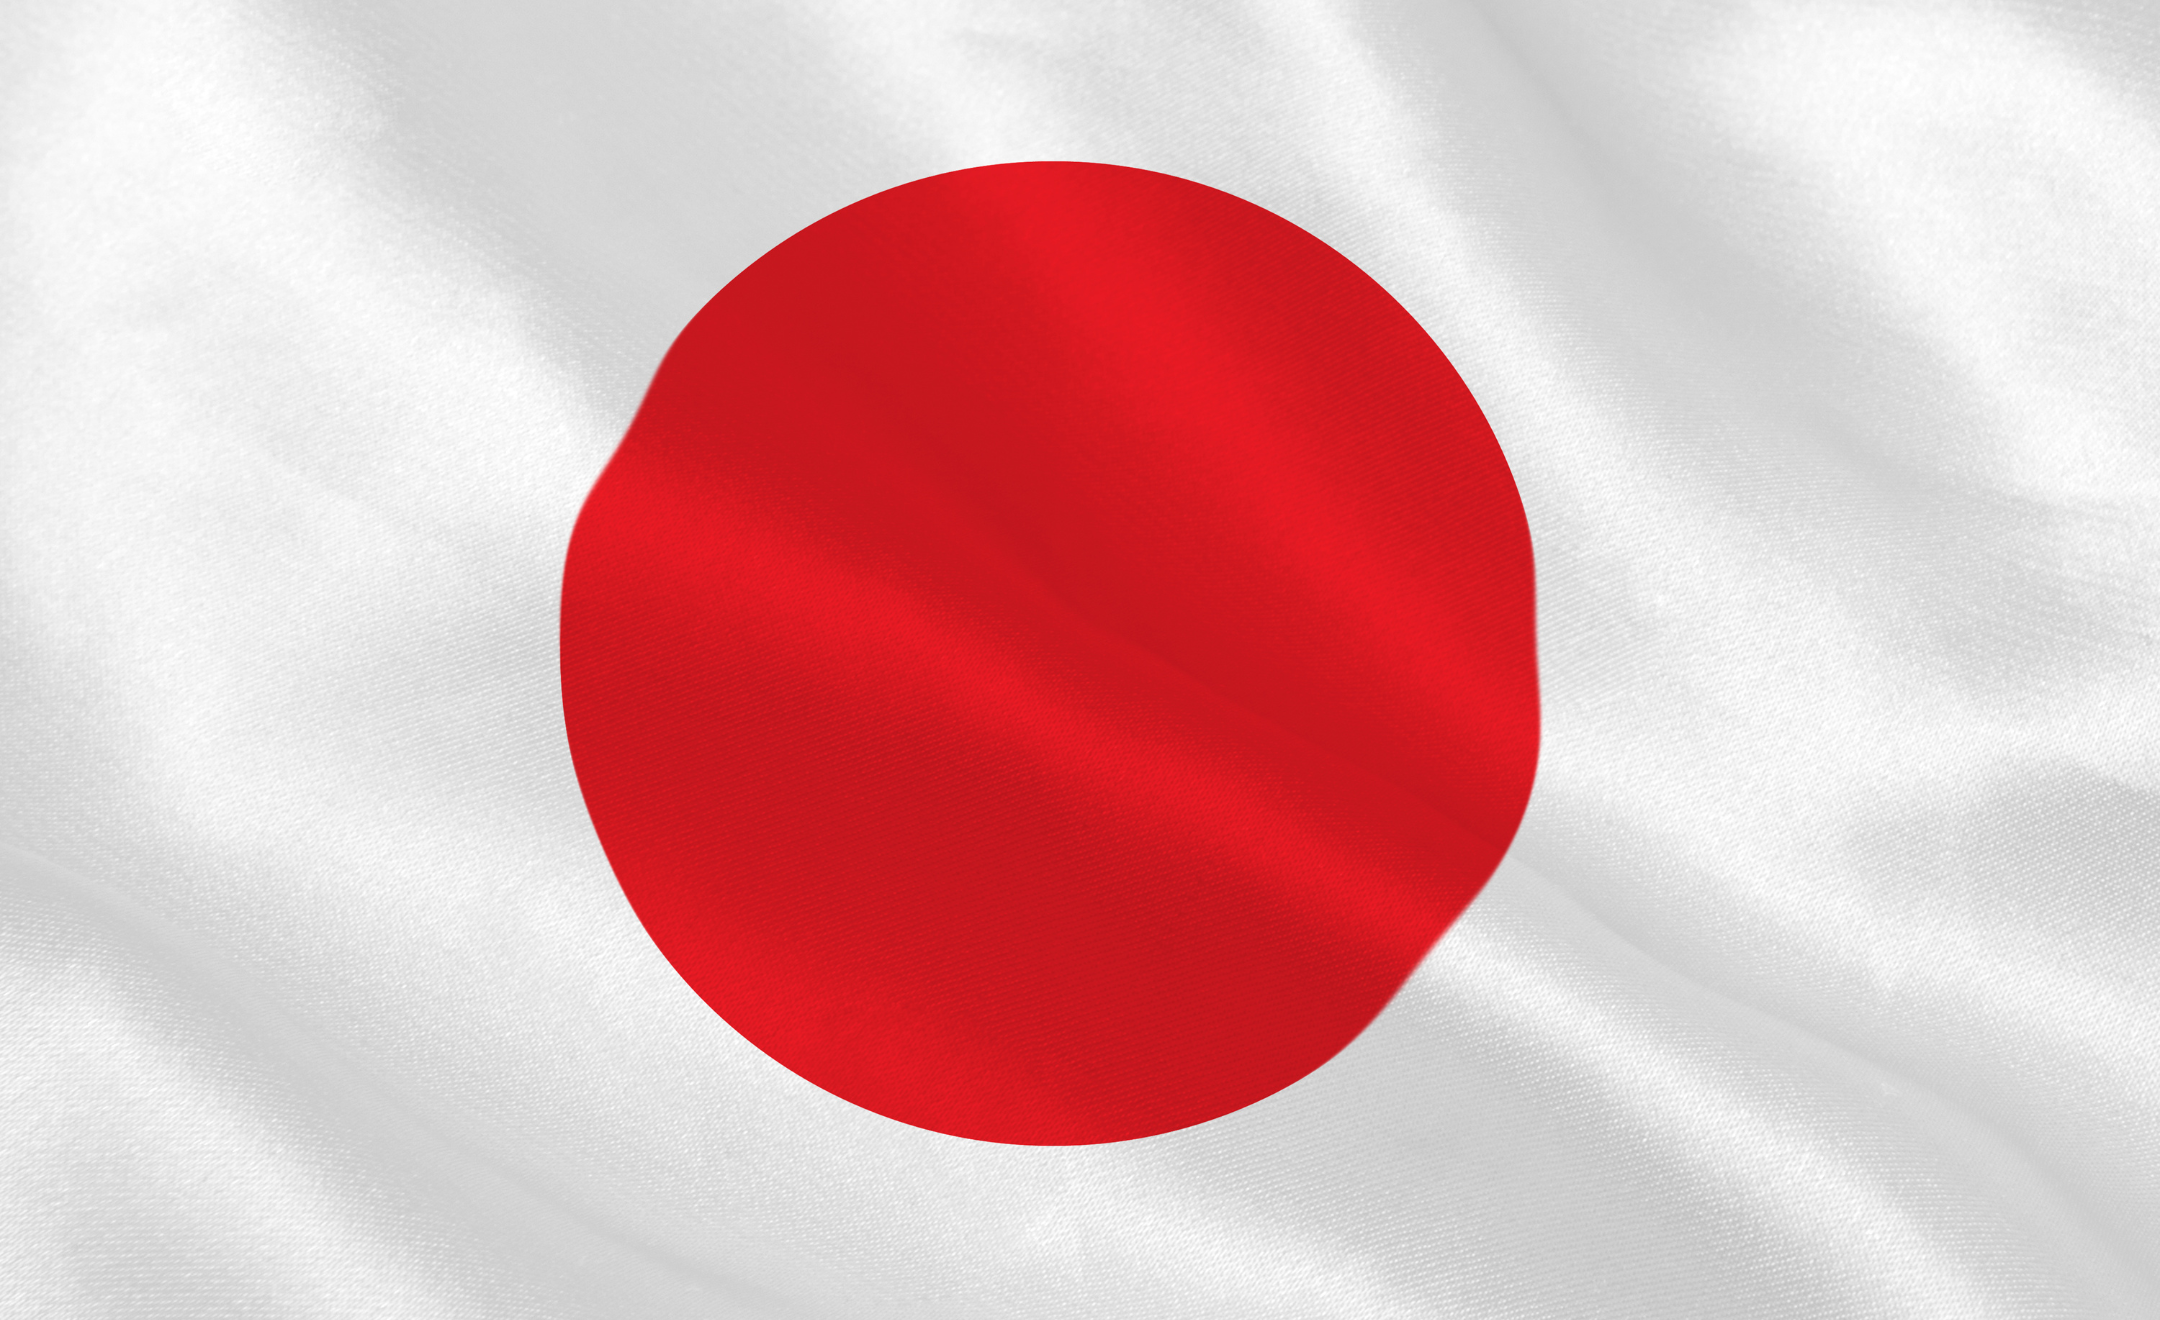 Image of the Japanese flag